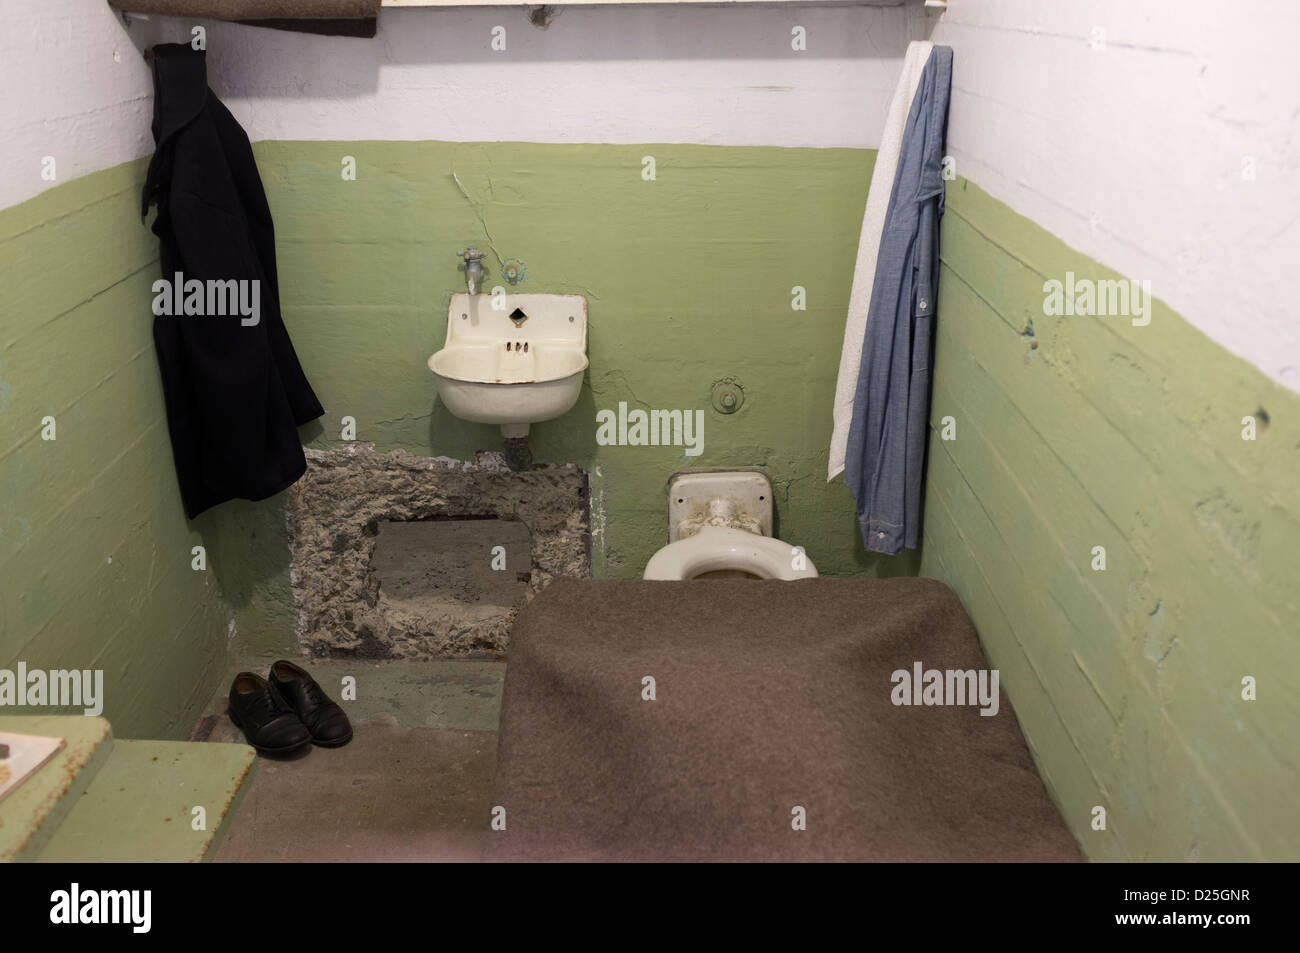 Alcatraz prison cell with hole in wall from which a prisoner was thought to have escaped Stock Photo